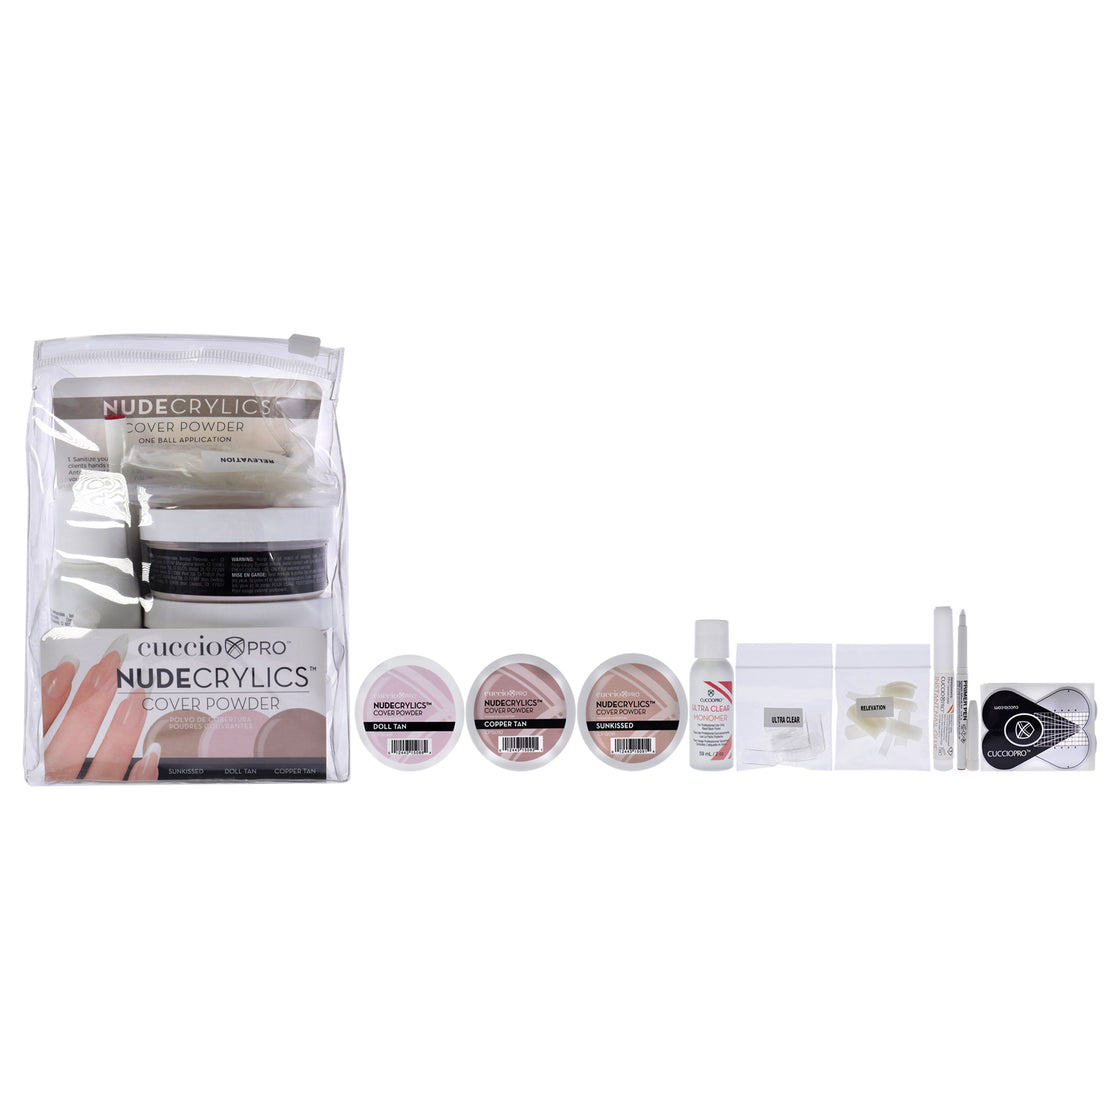 Nudecrylics Cover Powder Kit by Cuccio Pro 9 Pc -3 x 1.6oz Color Powders - Dolll Tan, Sunkissed, Cooper Tan, 0.07oz Primer Pen, 0.07oz Instant Nail Glue, 2oz Ultra Clear Monomer, 20 High C Curve Tips Assorted, 20 Ultra Wear Tips Clear, 20 Nail Forms